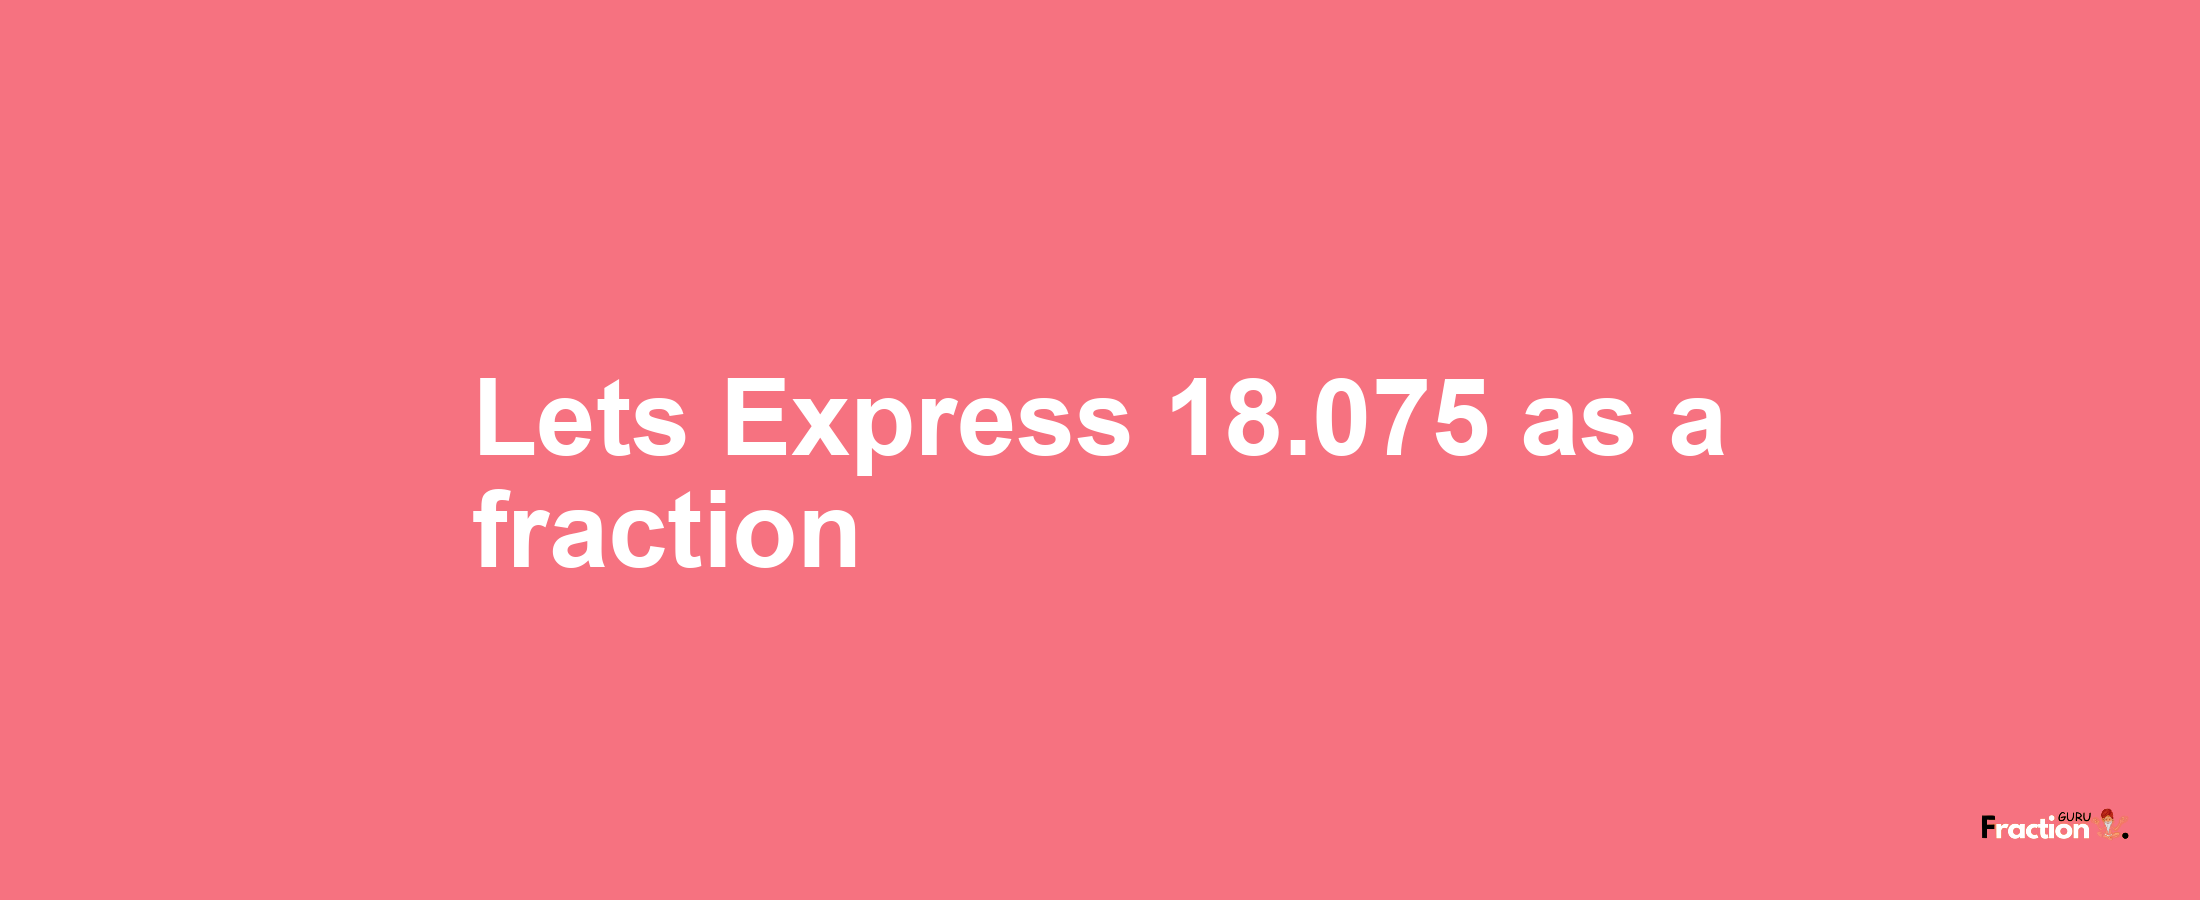 Lets Express 18.075 as afraction